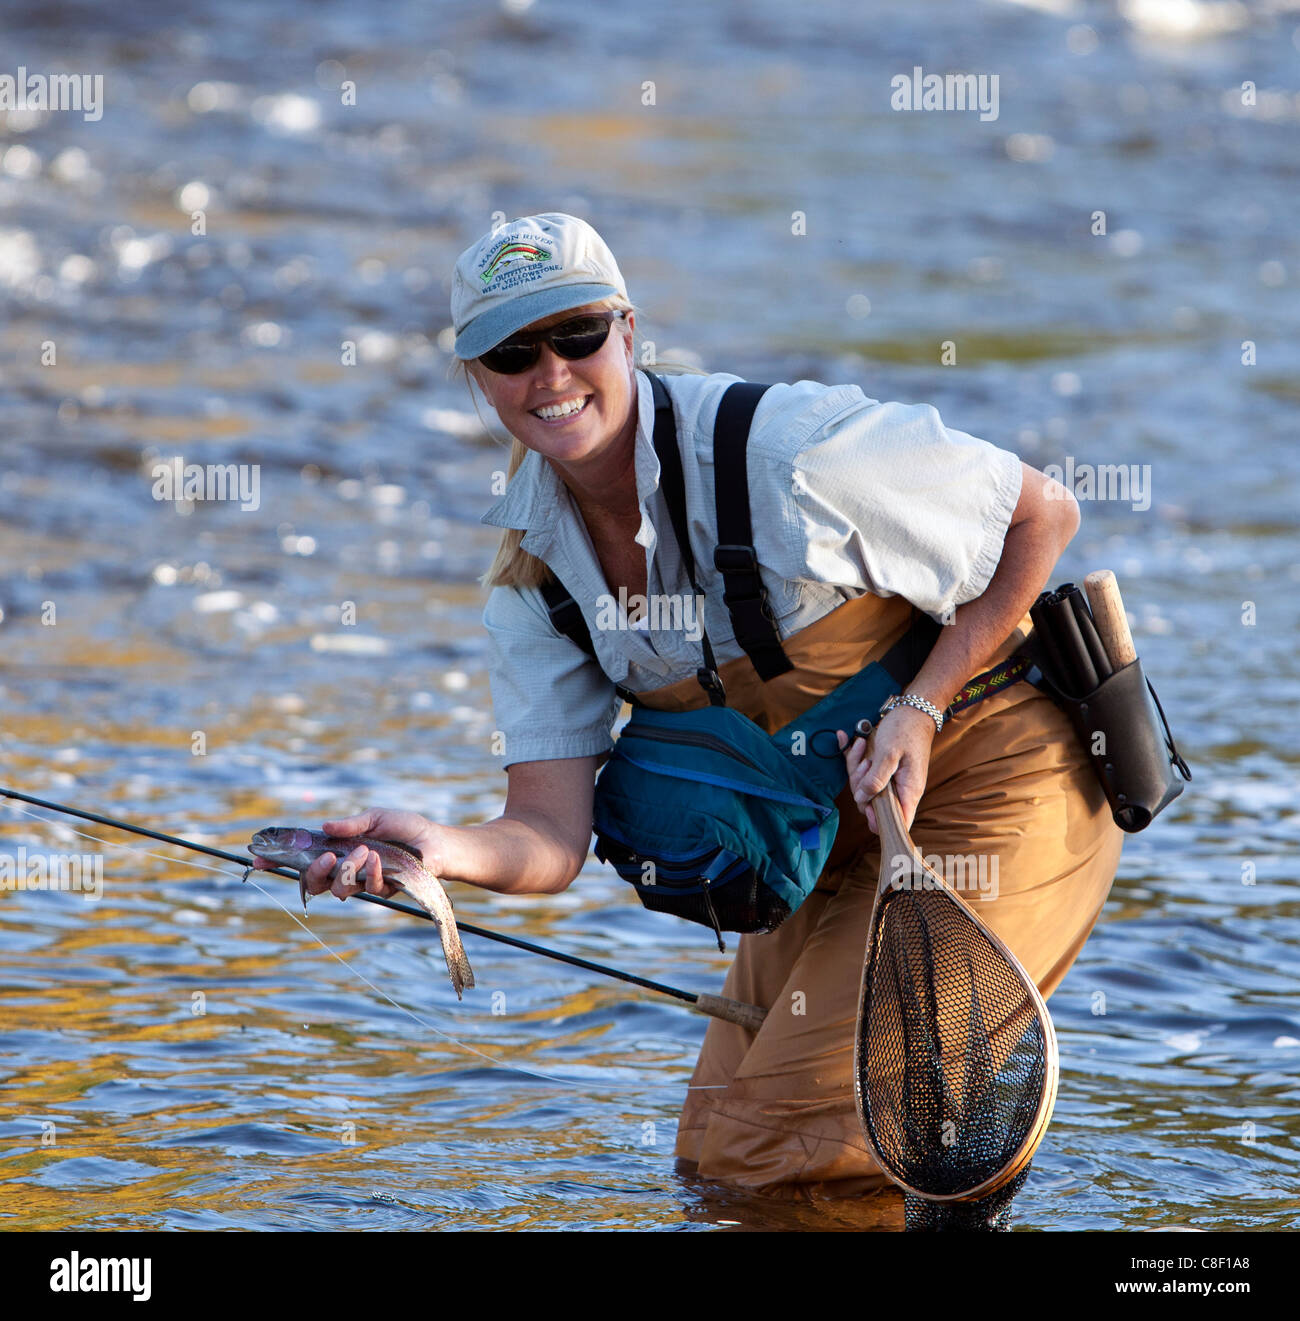 https://c8.alamy.com/comp/C8F1A8/a-woman-female-fly-fishing-with-a-freshly-caught-rainbow-trout-in-C8F1A8.jpg